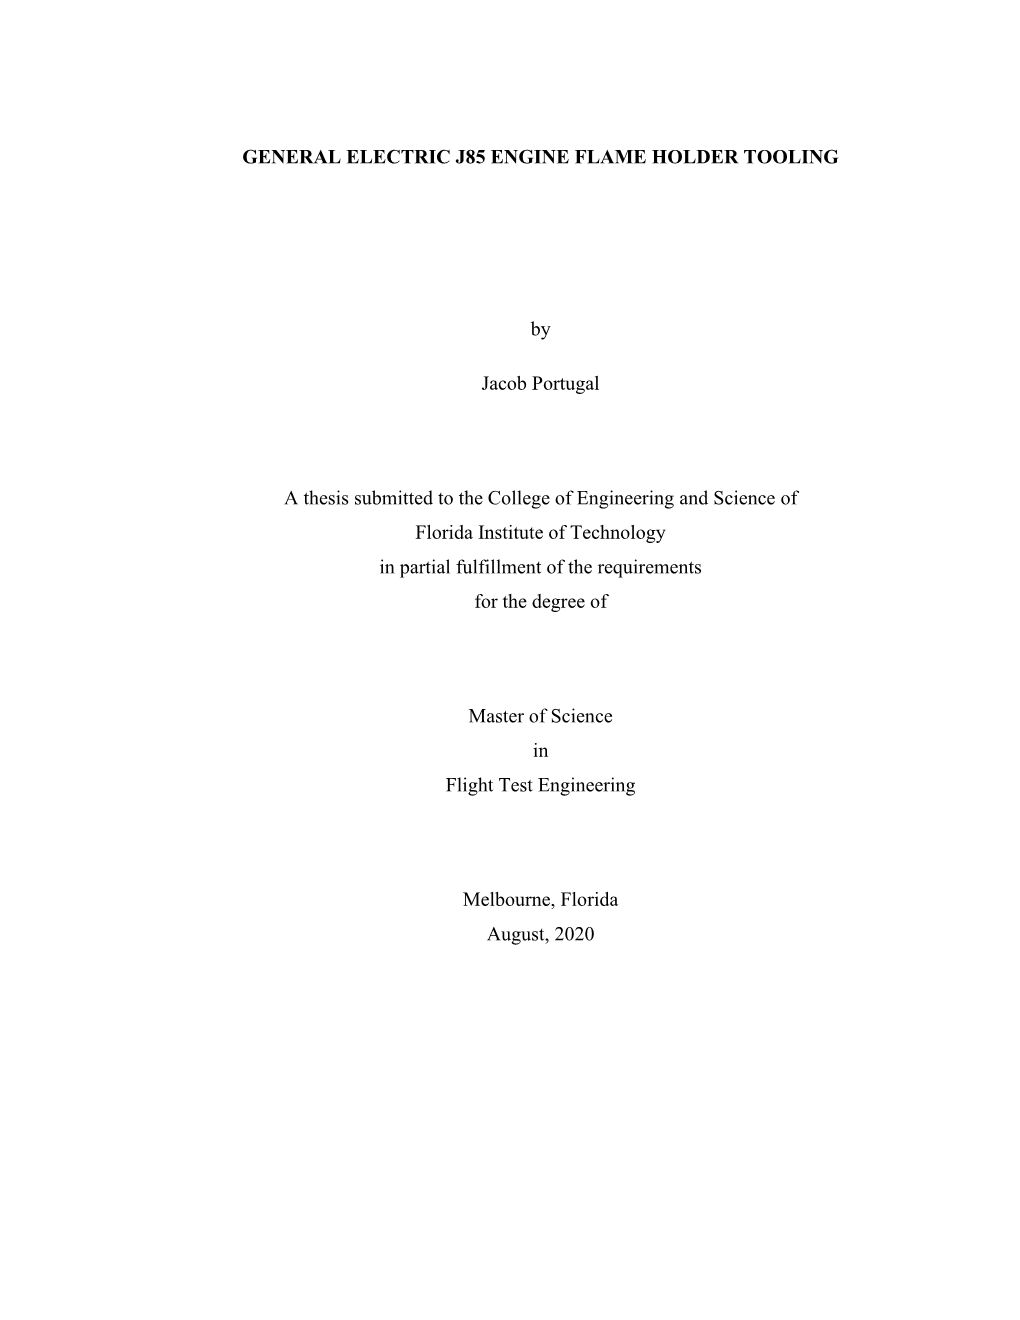 Thesis Submitted to the College of Engineering and Science of Florida Institute of Technology in Partial Fulfillment of the Requirements for the Degree Of